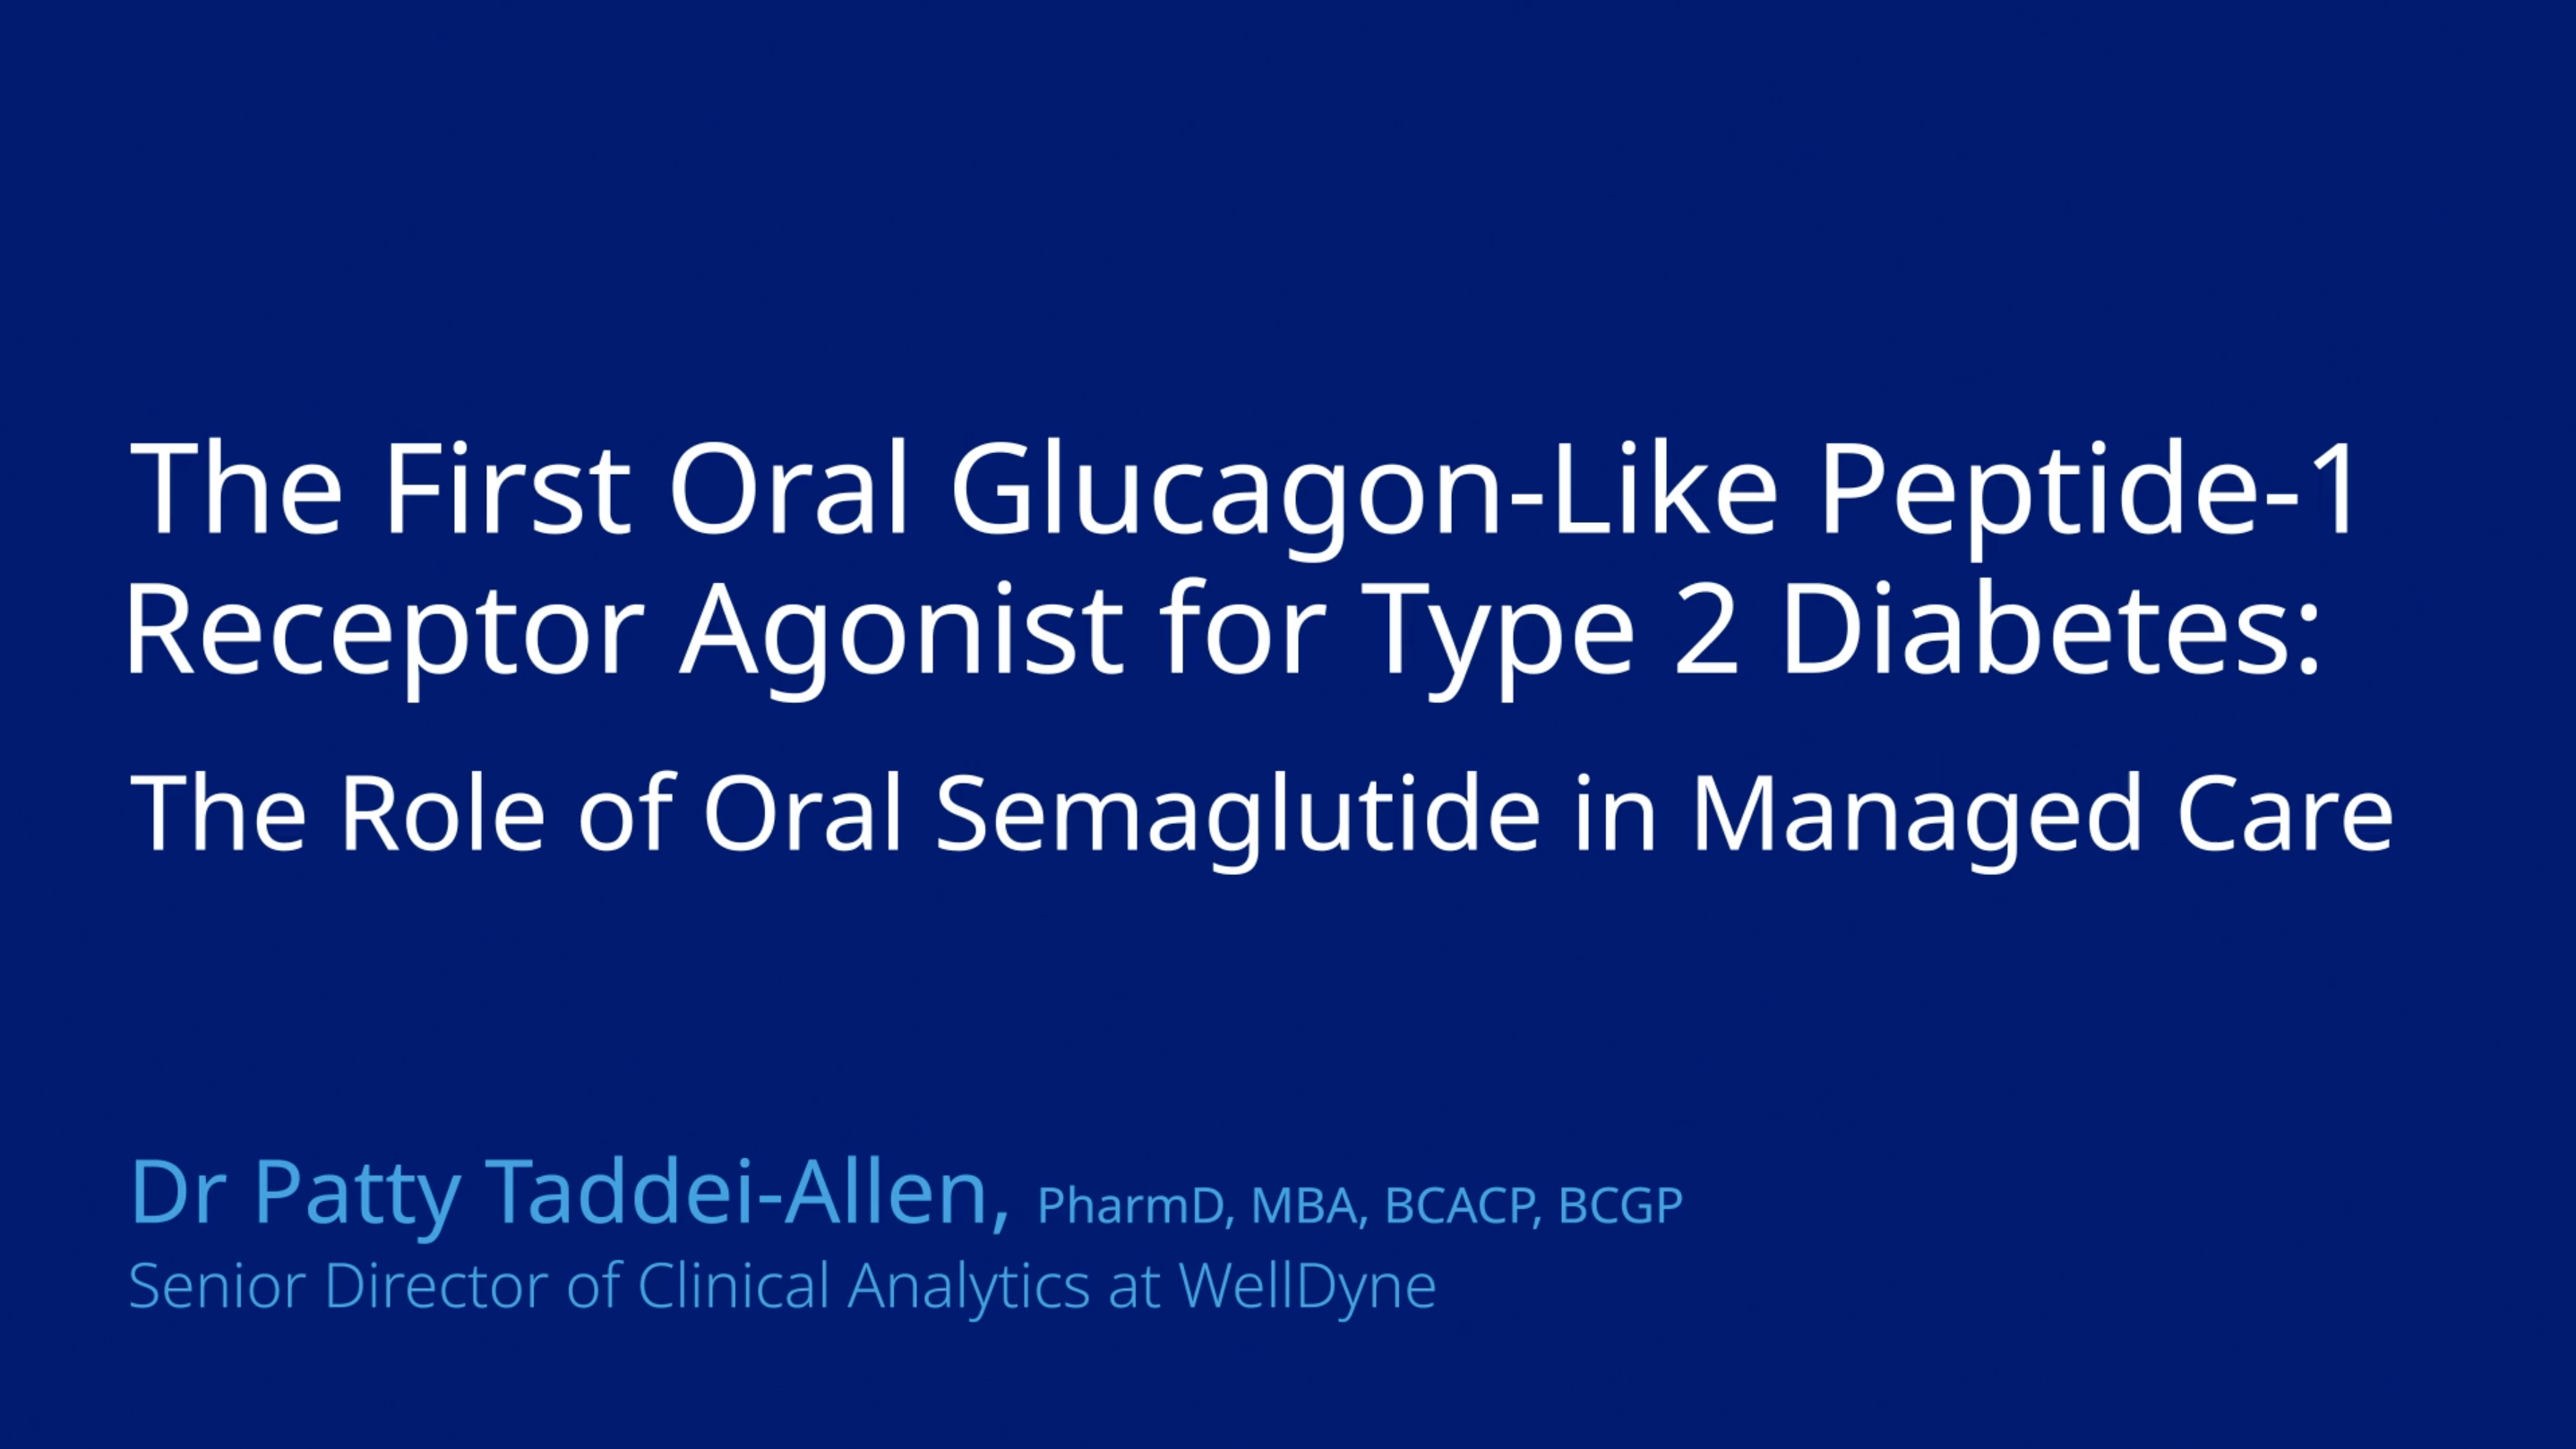 Full Video Abstract: Evidence for Oral Semaglutide in Type 2 Diabetes 